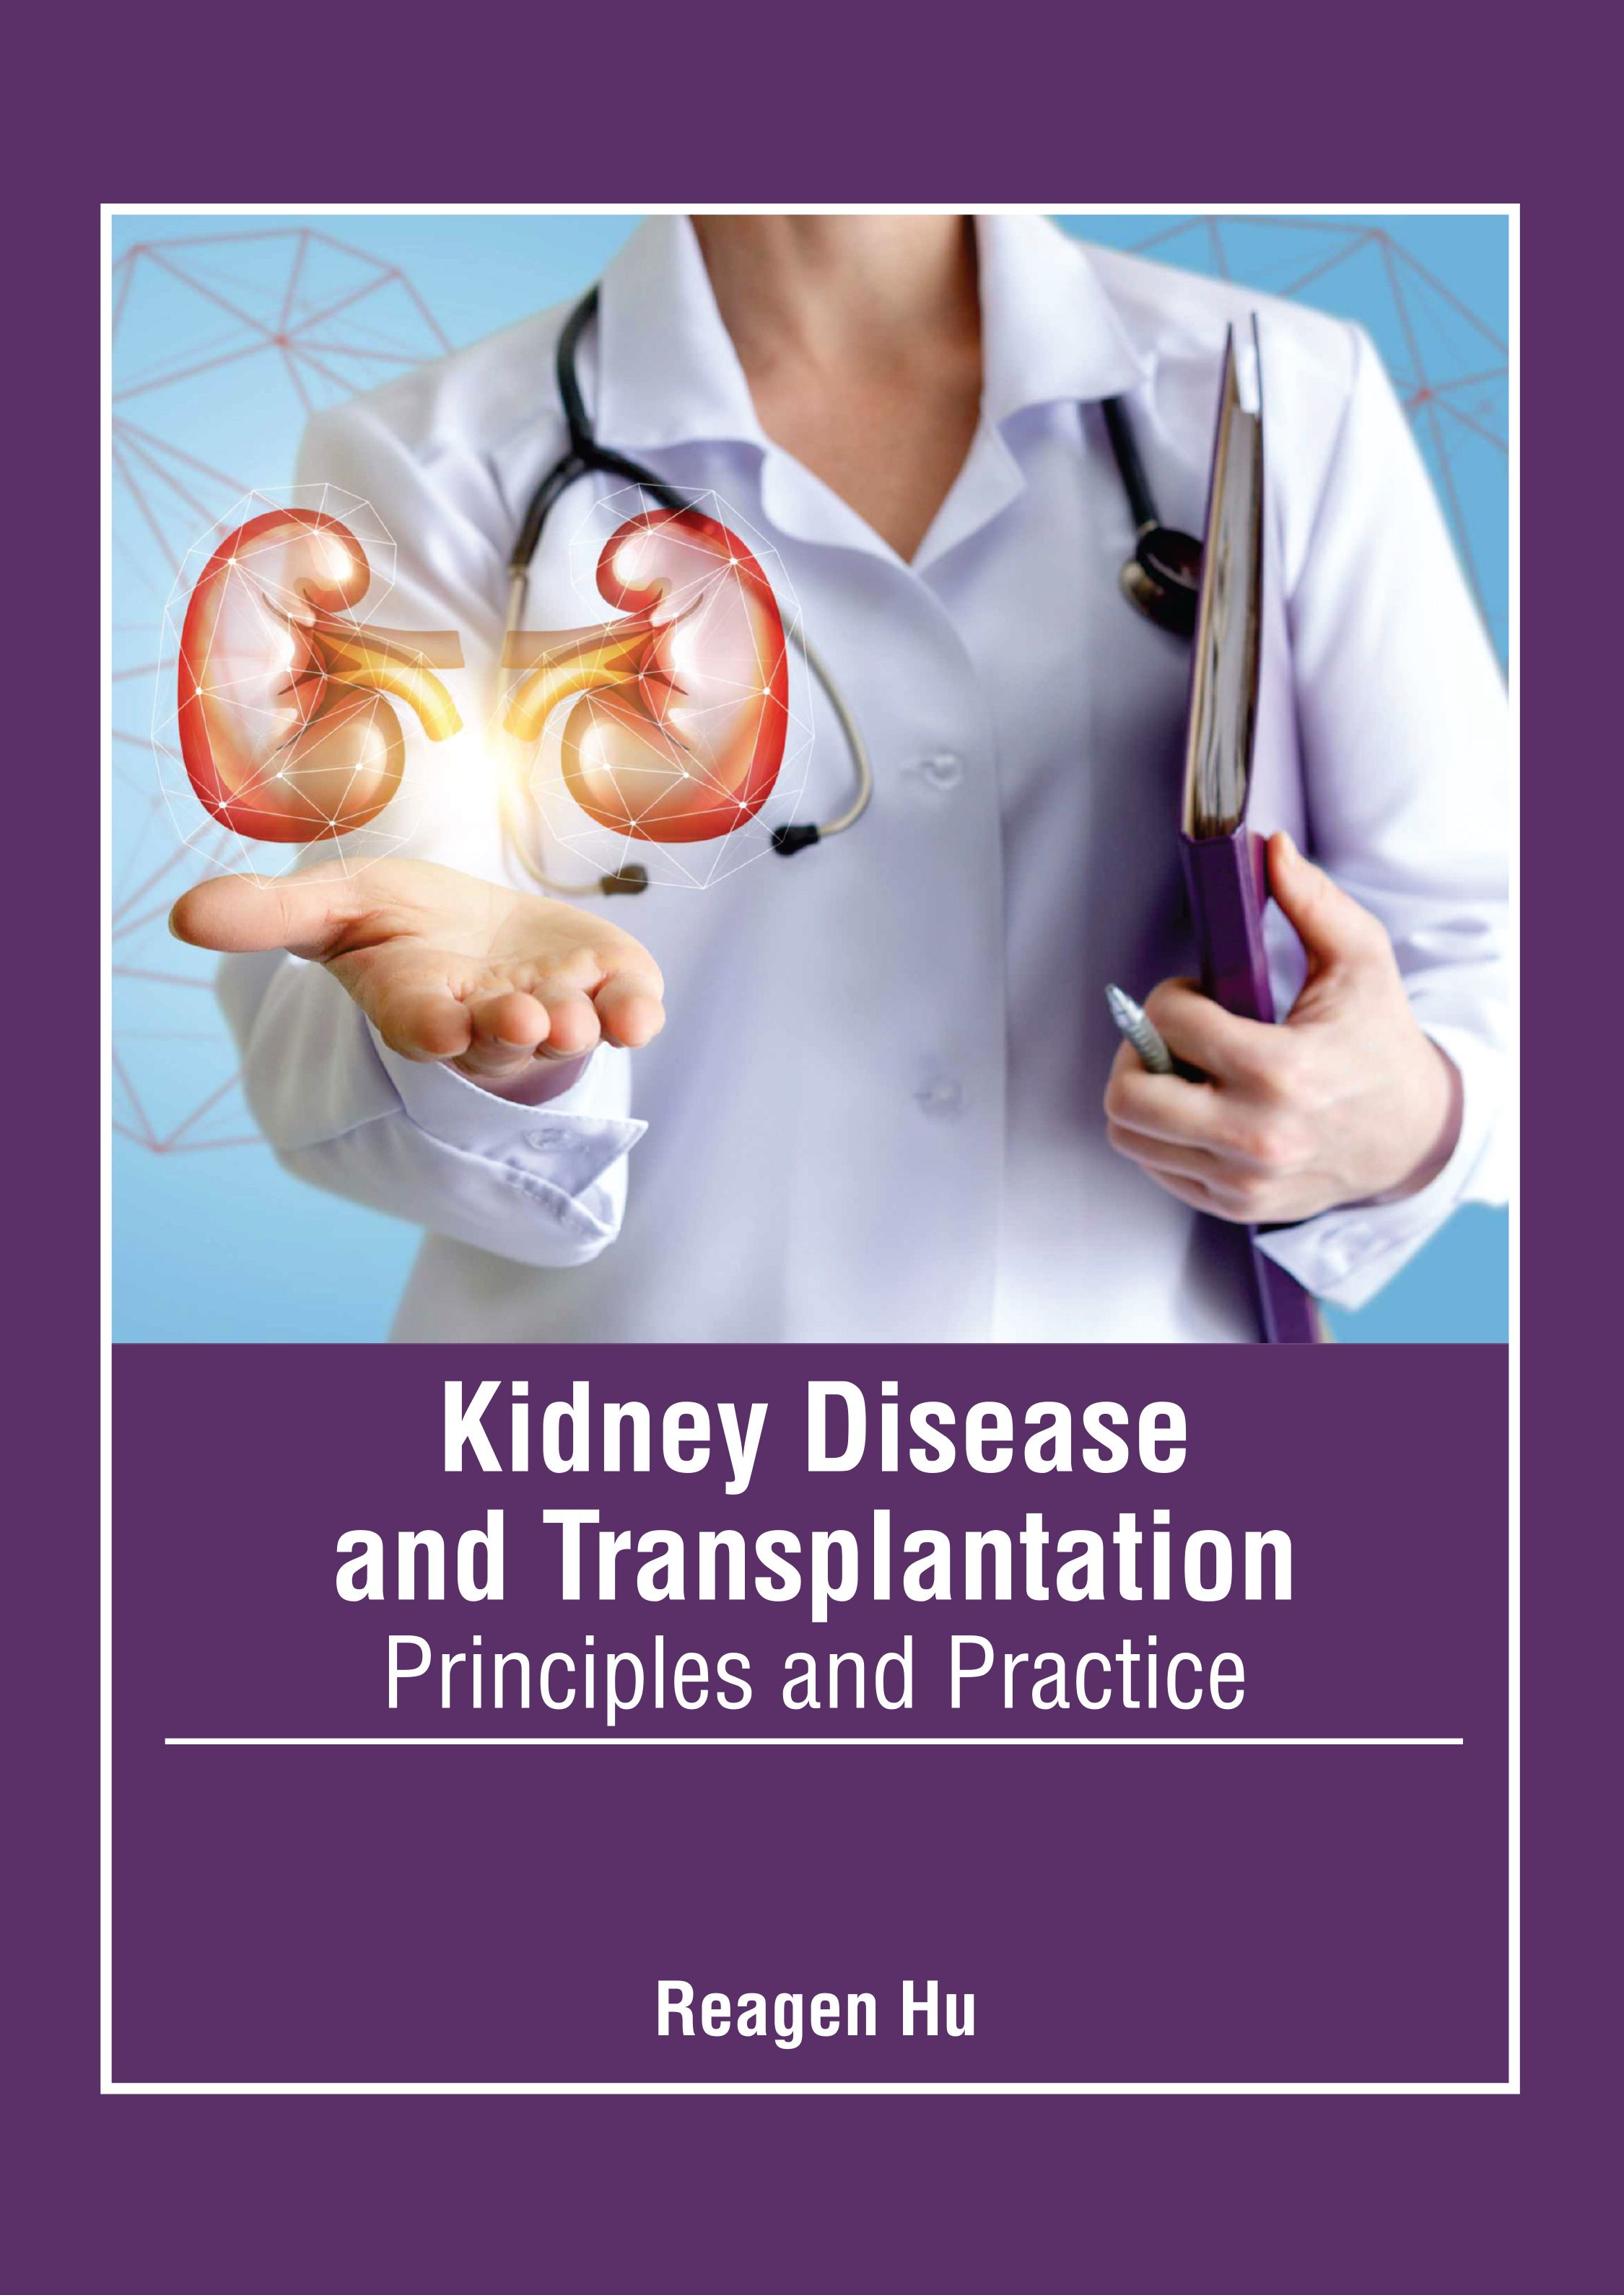 KIDNEY DISEASE AND TRANSPLANTATION: PRINCIPLES AND PRACTICE